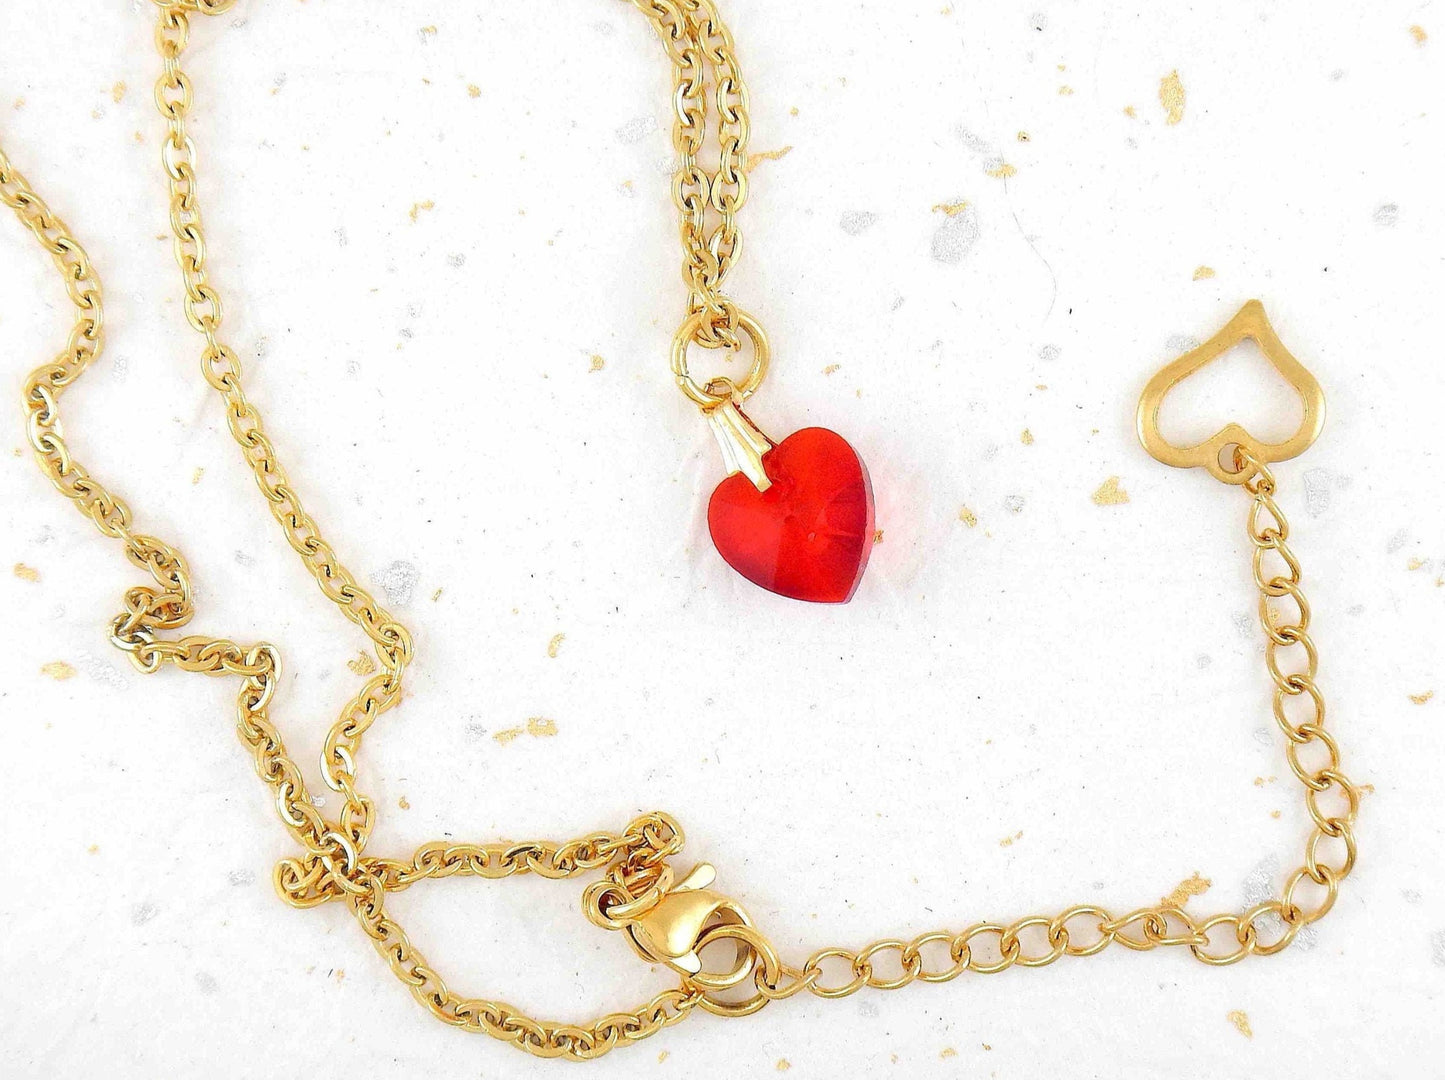 15-inch necklace with 10mm deep red faceted crystal heart pendant, gold-toned stainless steel chain